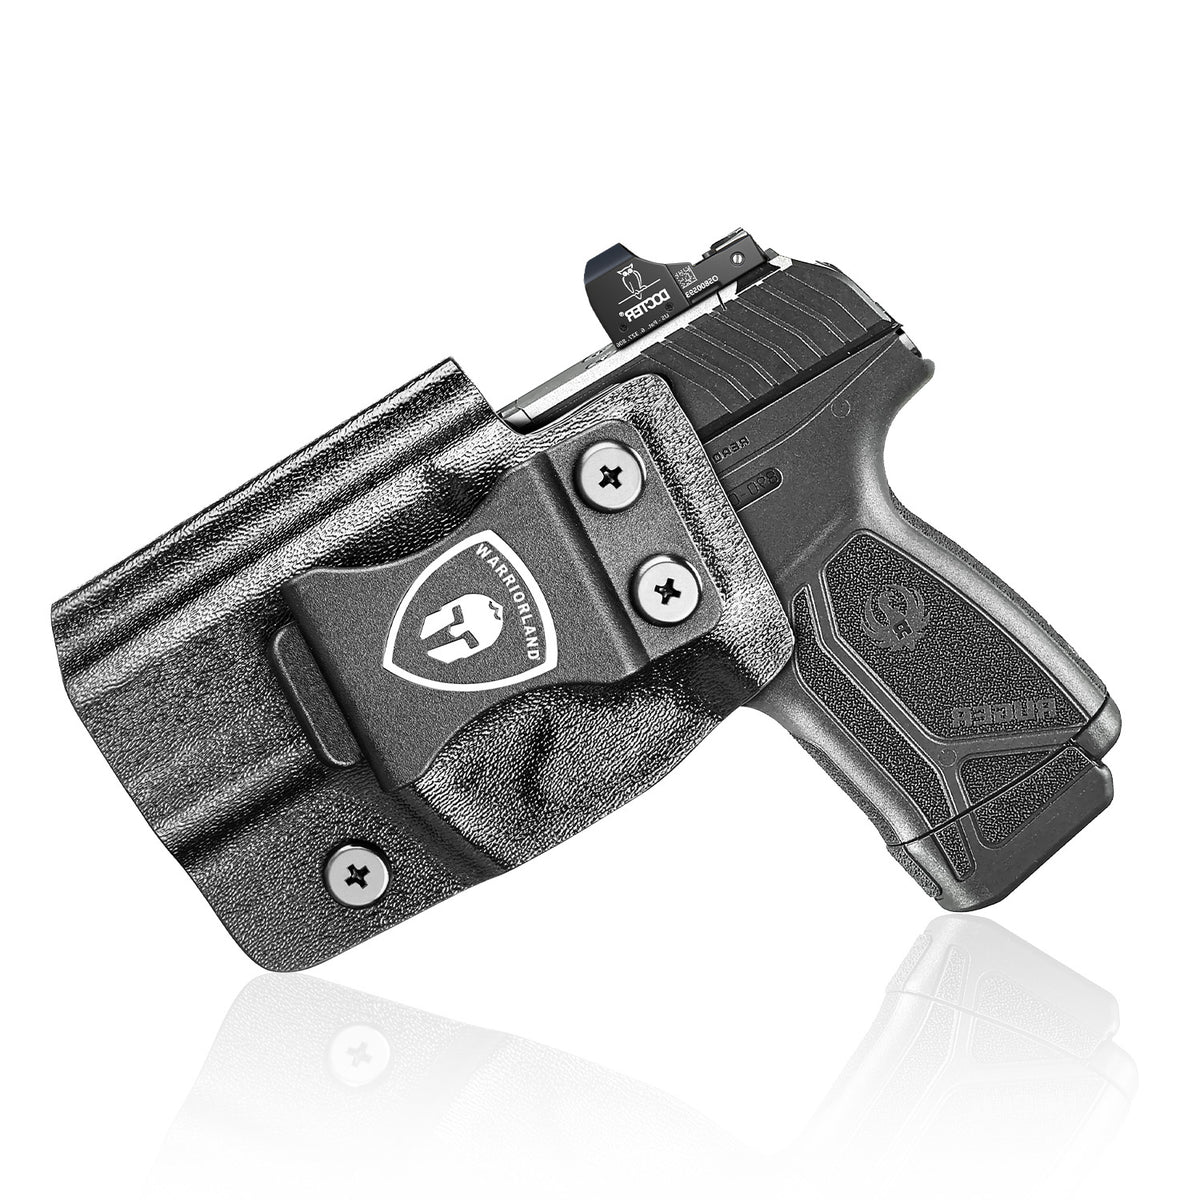 Ruger MAX-9 Holster IWB Kydex Holster Optics Cut: Ruger Max 9 Pistol, Inside Waistband Appendix Carry MAX 9mm Holster, Adj. Retention & Cant, Right/Left Hand Optional|WARRIORLAND